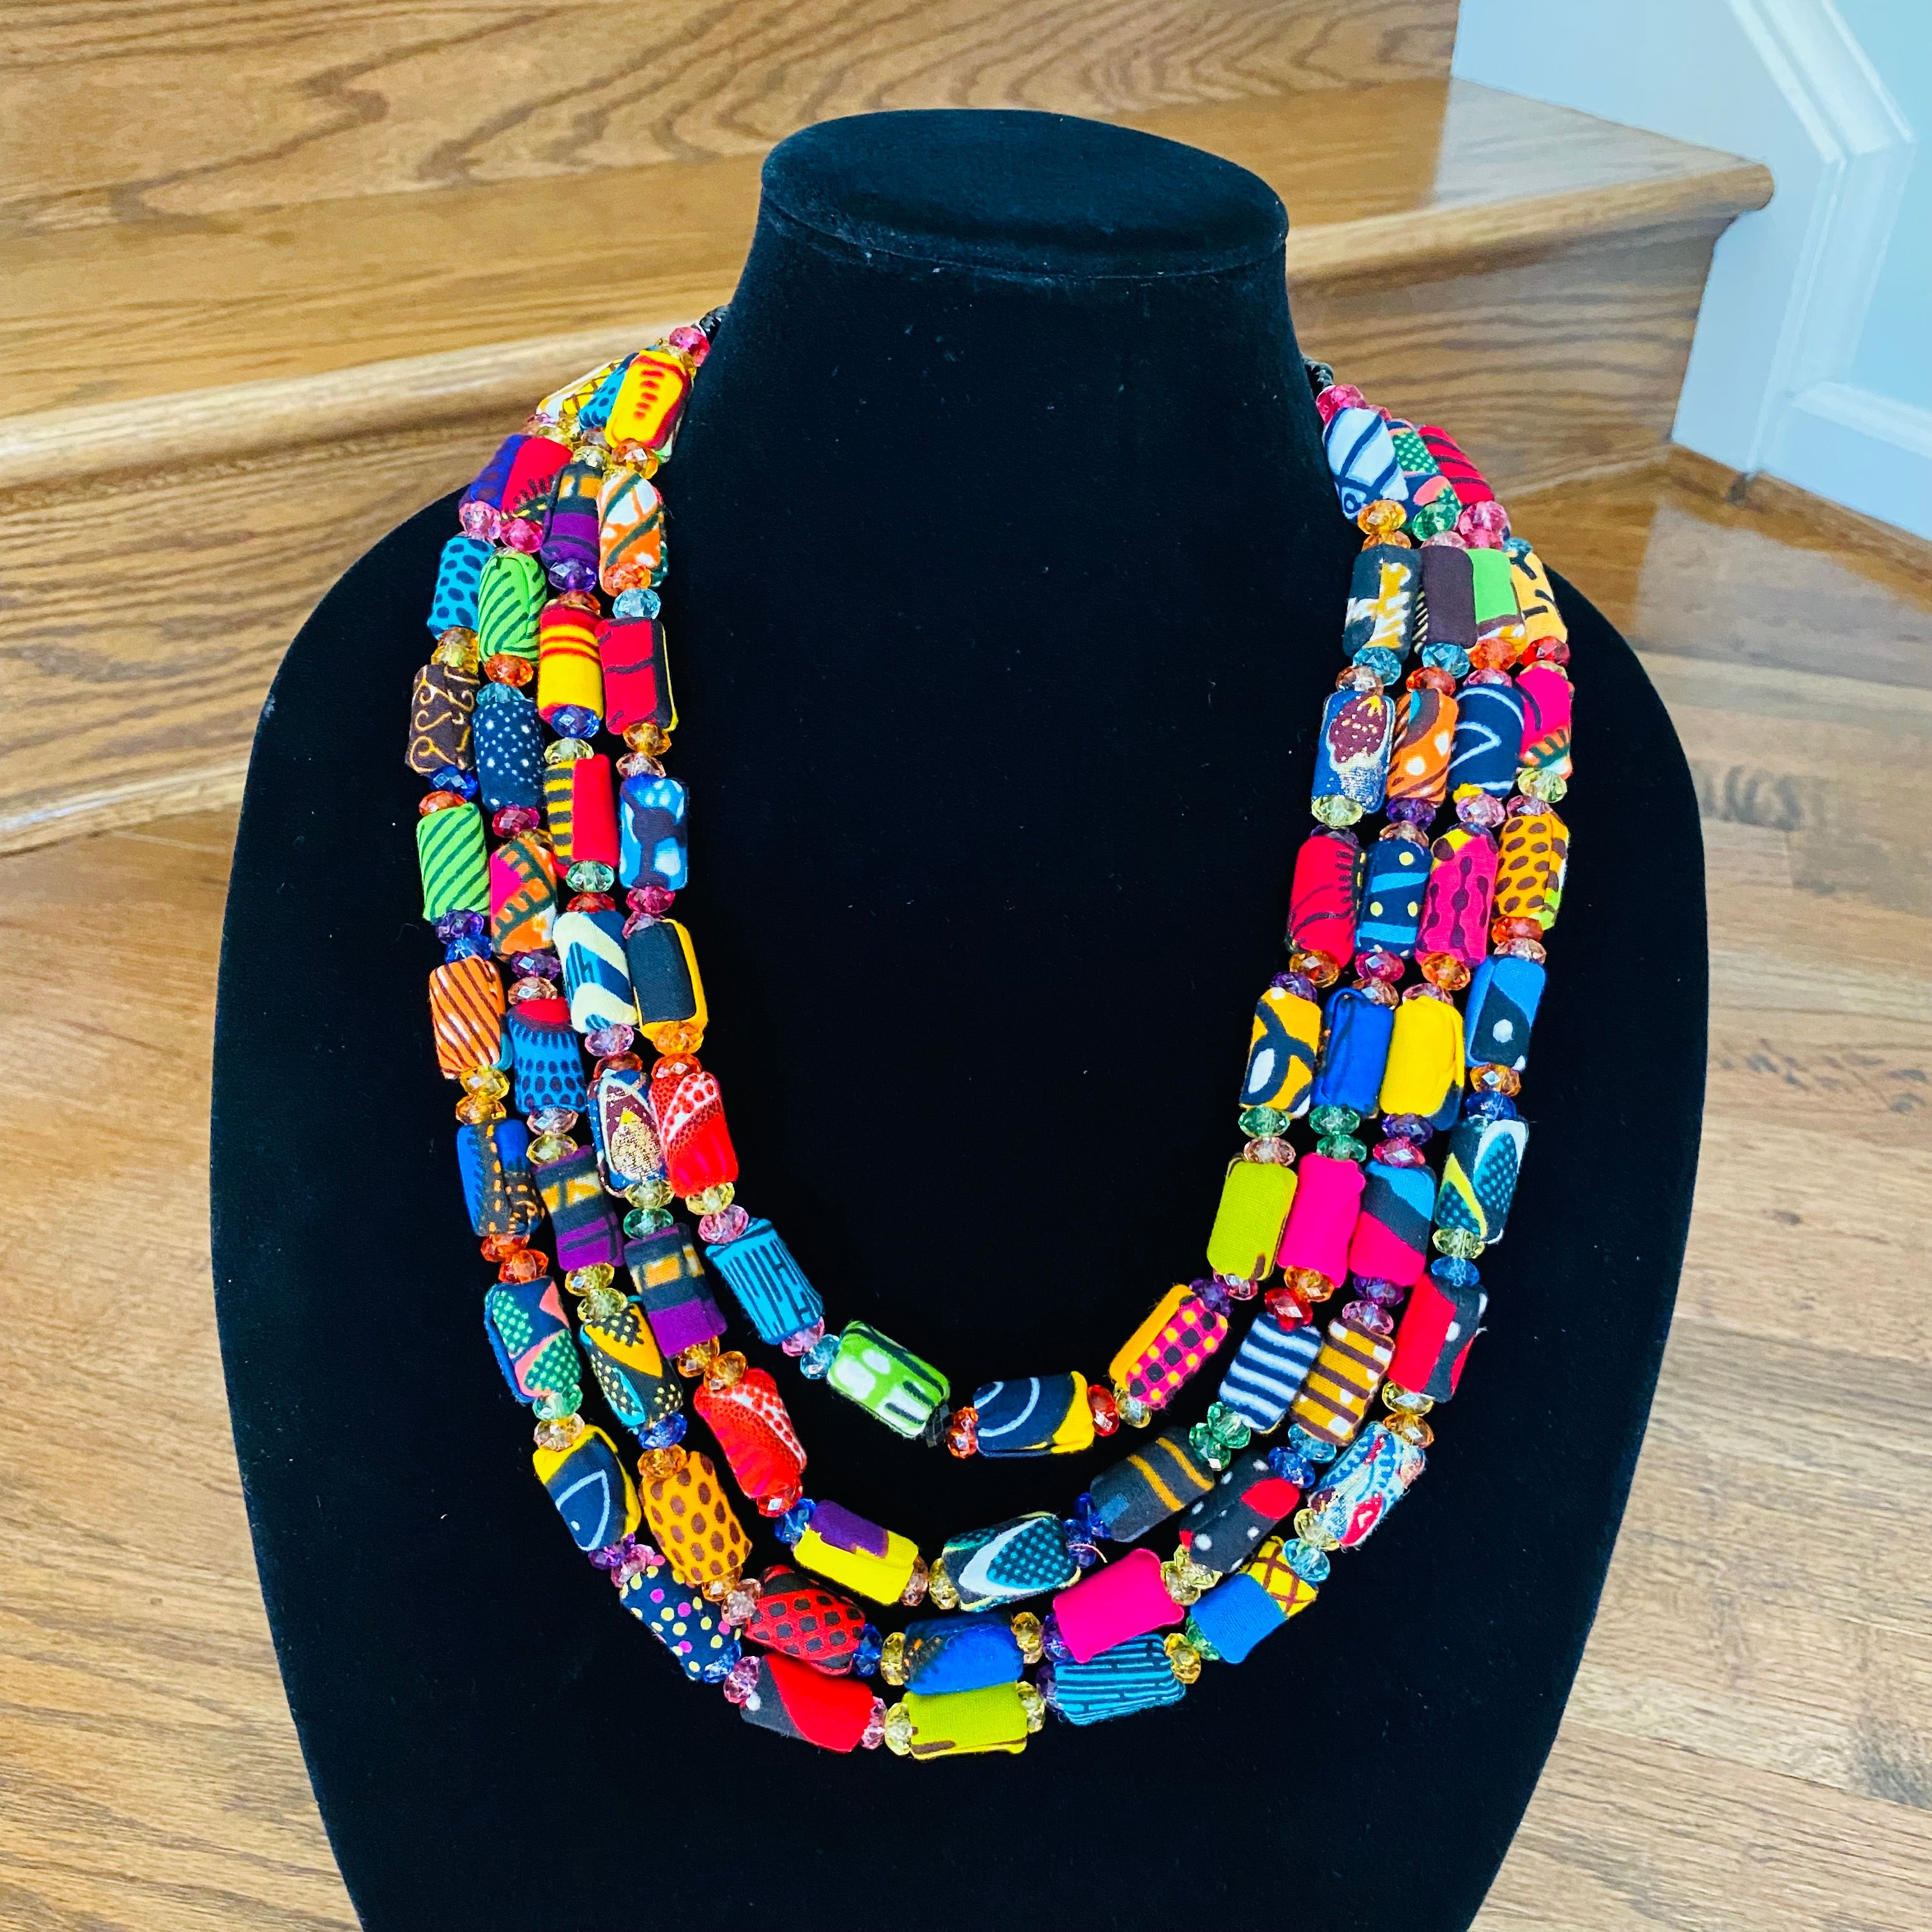 The Candy Necklace